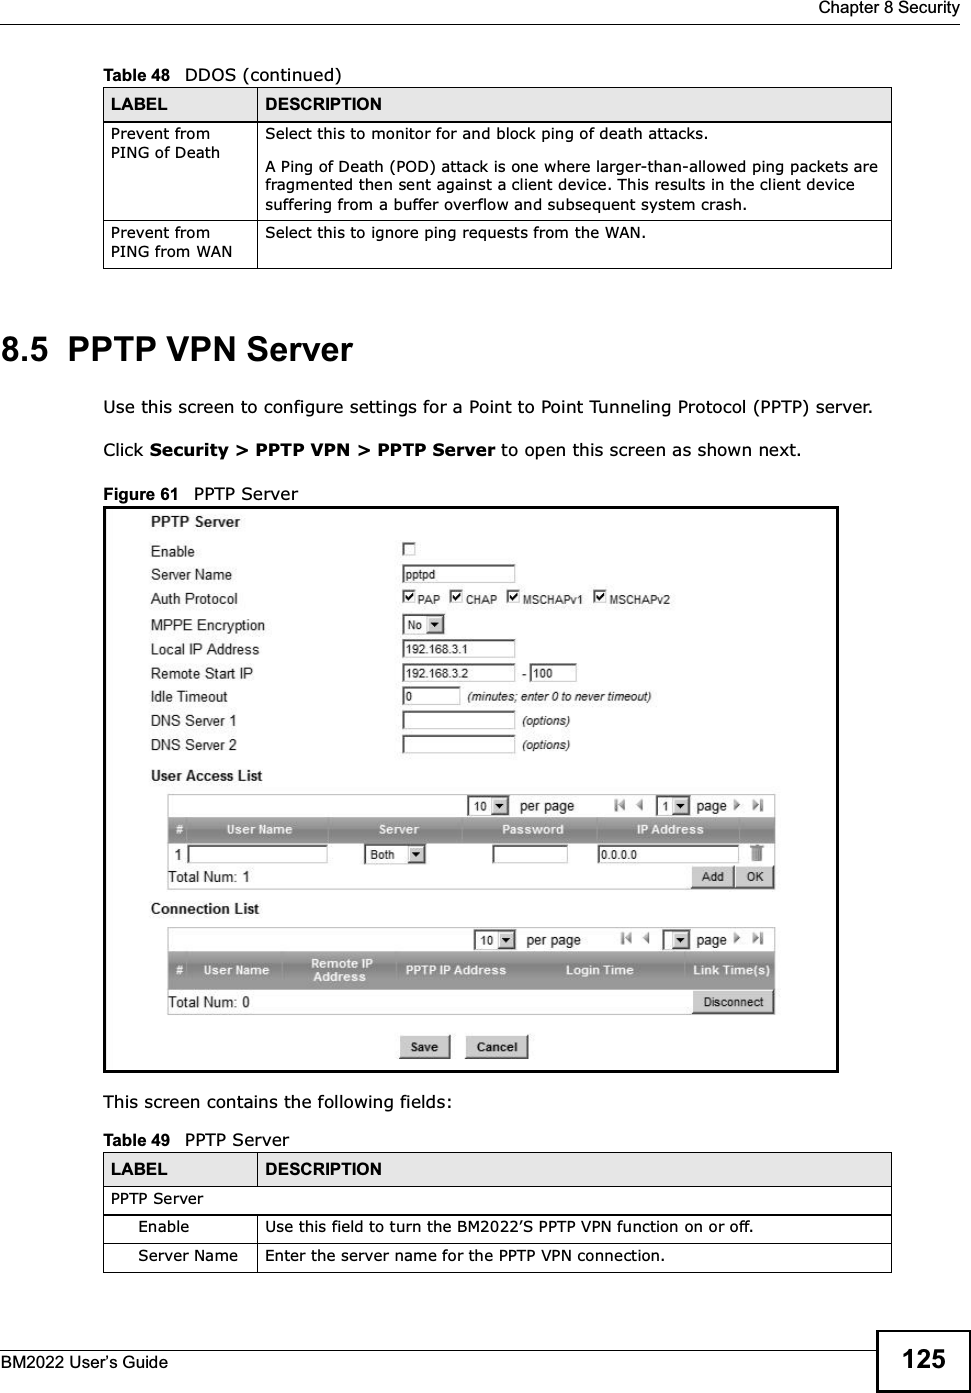  Chapter 8 SecurityBM2022 Users Guide 1258.5  PPTP VPN ServerUse this screen to configure settings for a Point to Point Tunneling Protocol (PPTP) server.Click Security &gt; PPTP VPN &gt; PPTP Server to open this screen as shown next.Figure 61   PPTP ServerThis screen contains the following fields:Prevent from PING of DeathSelect this to monitor for and block ping of death attacks.A Ping of Death (POD) attack is one where larger-than-allowed ping packets are fragmented then sent against a client device. This results in the client device suffering from a buffer overflow and subsequent system crash.Prevent from PING from WANSelect this to ignore ping requests from the WAN.Table 48   DDOS (continued)LABEL DESCRIPTIONTable 49   PPTP ServerLABEL DESCRIPTIONPPTP ServerEnable Use this field to turn the BM2022S PPTP VPN function on or off.Server Name Enter the server name for the PPTP VPN connection.